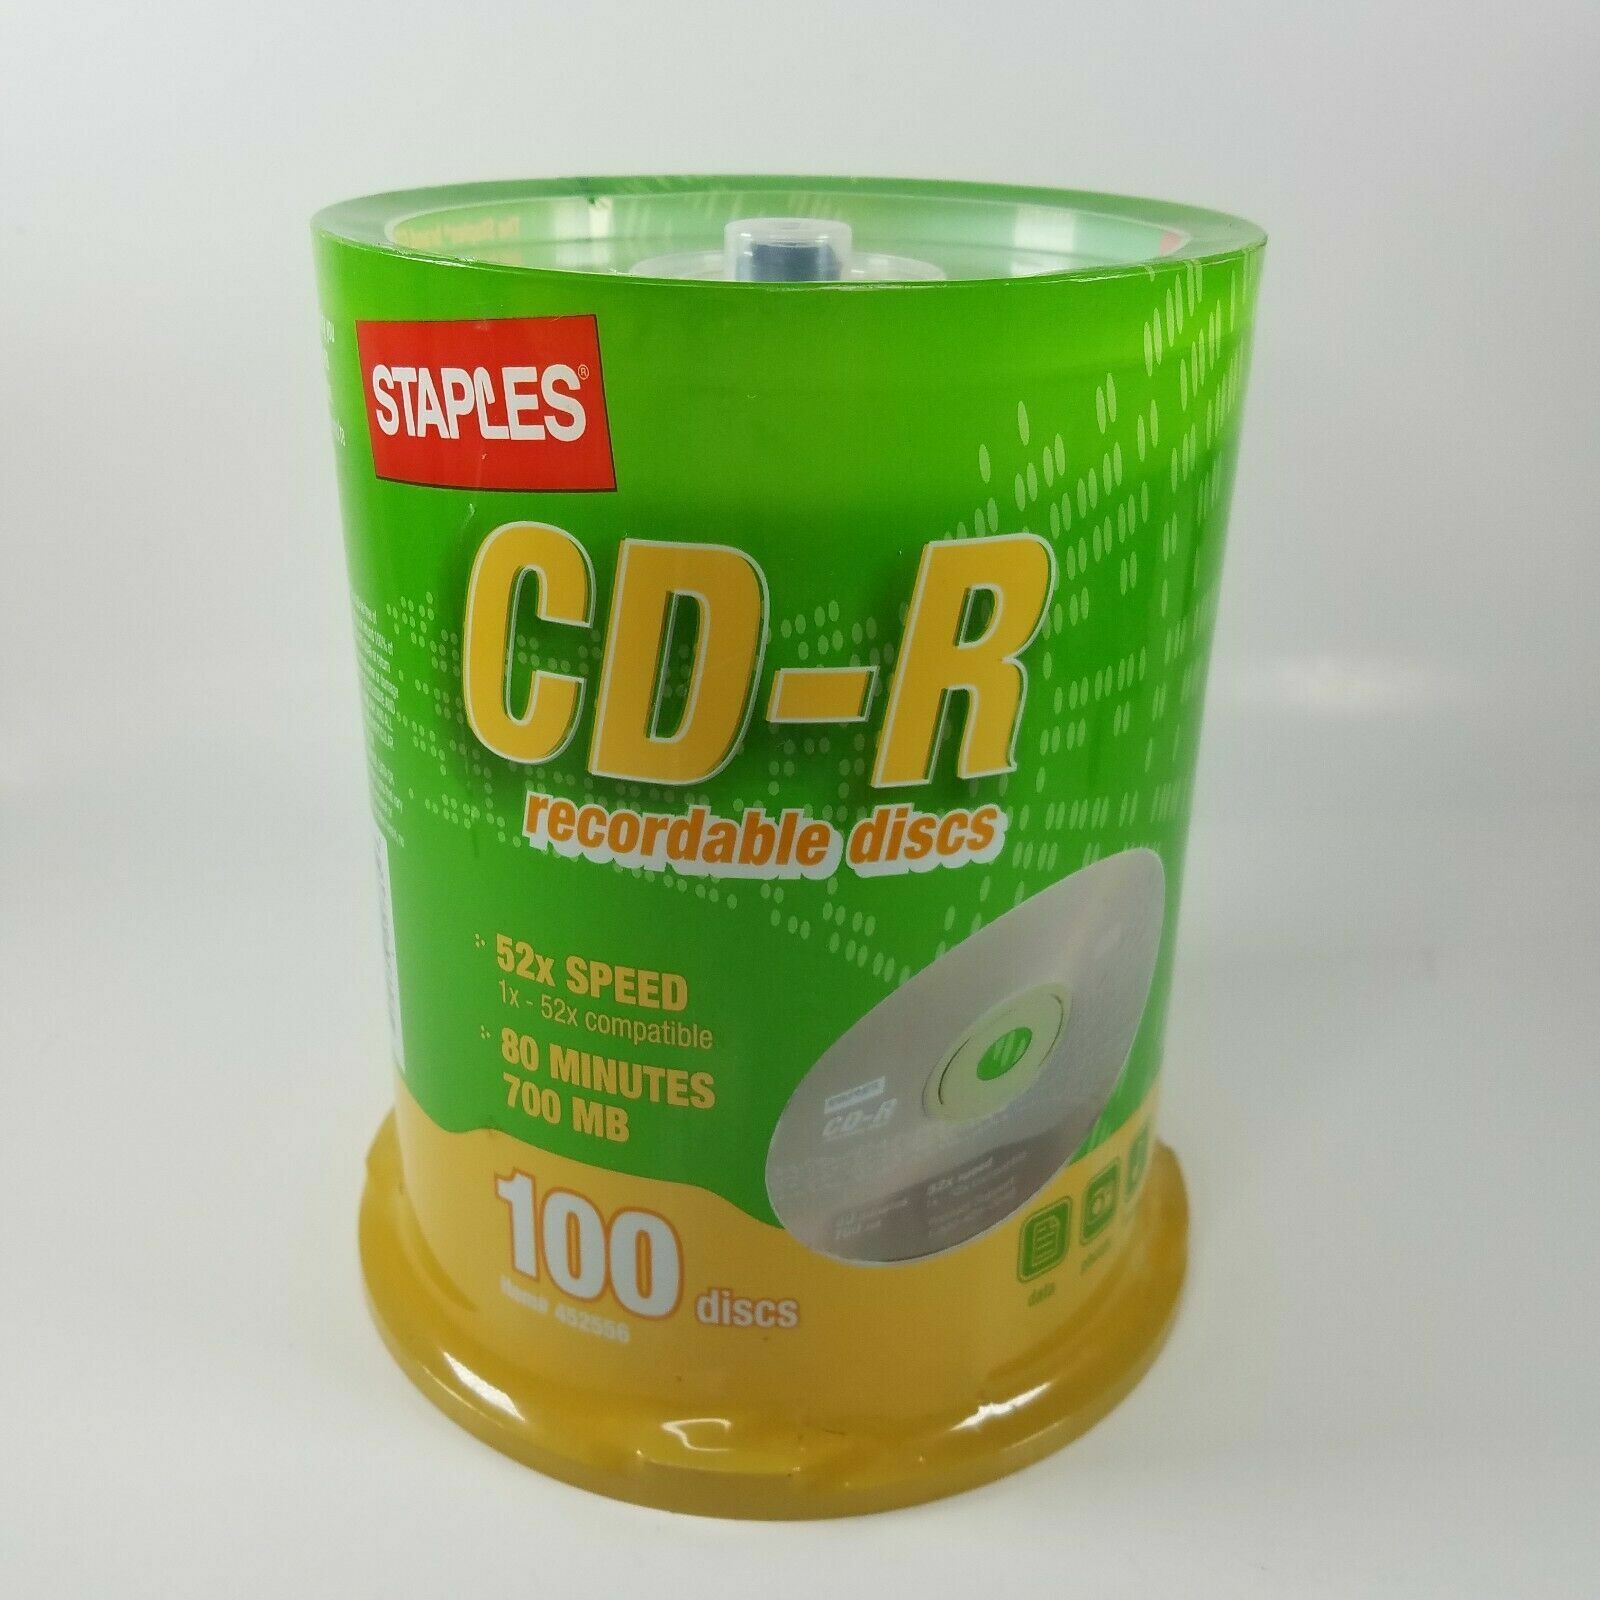 NEW in Box Staples CD-R 80 Min Recording 700MB  52x Speed 100 Disc Pack Blank 